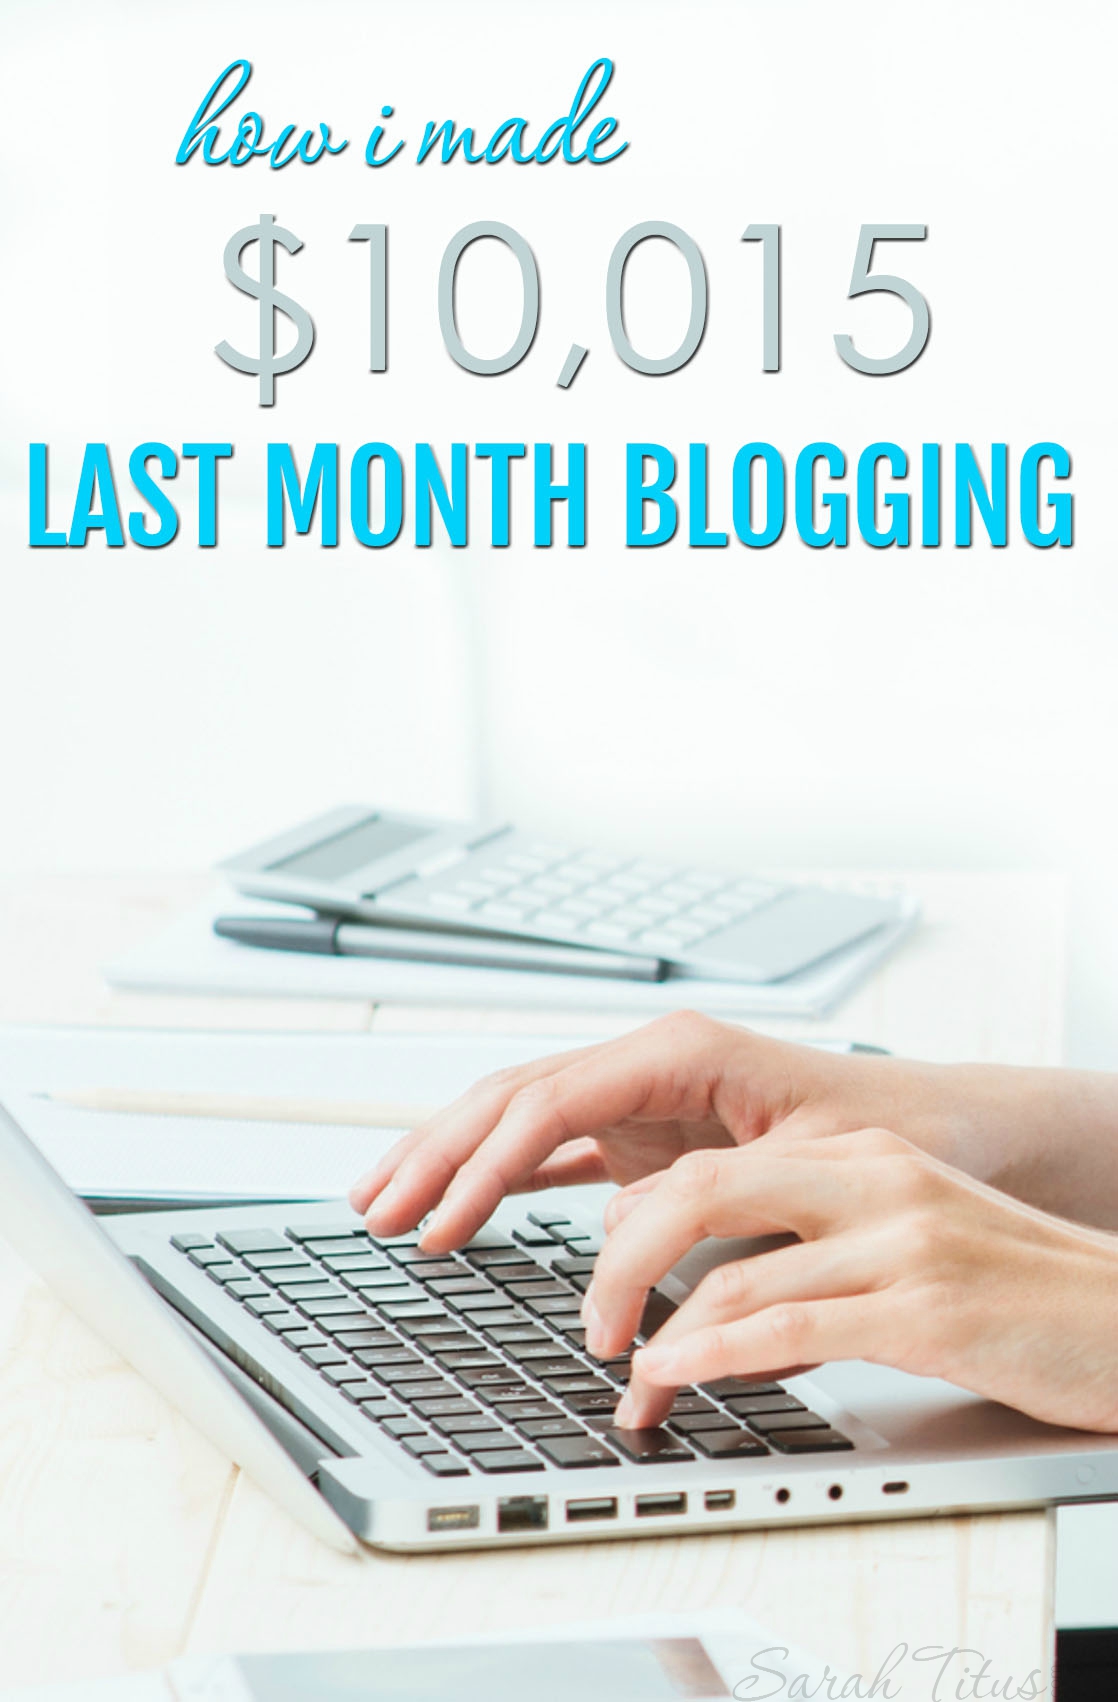 Before my blog turned a year old, I was making over $10,000/month. Here's the long anticipated full income report on how I made $10,015 last month blogging.